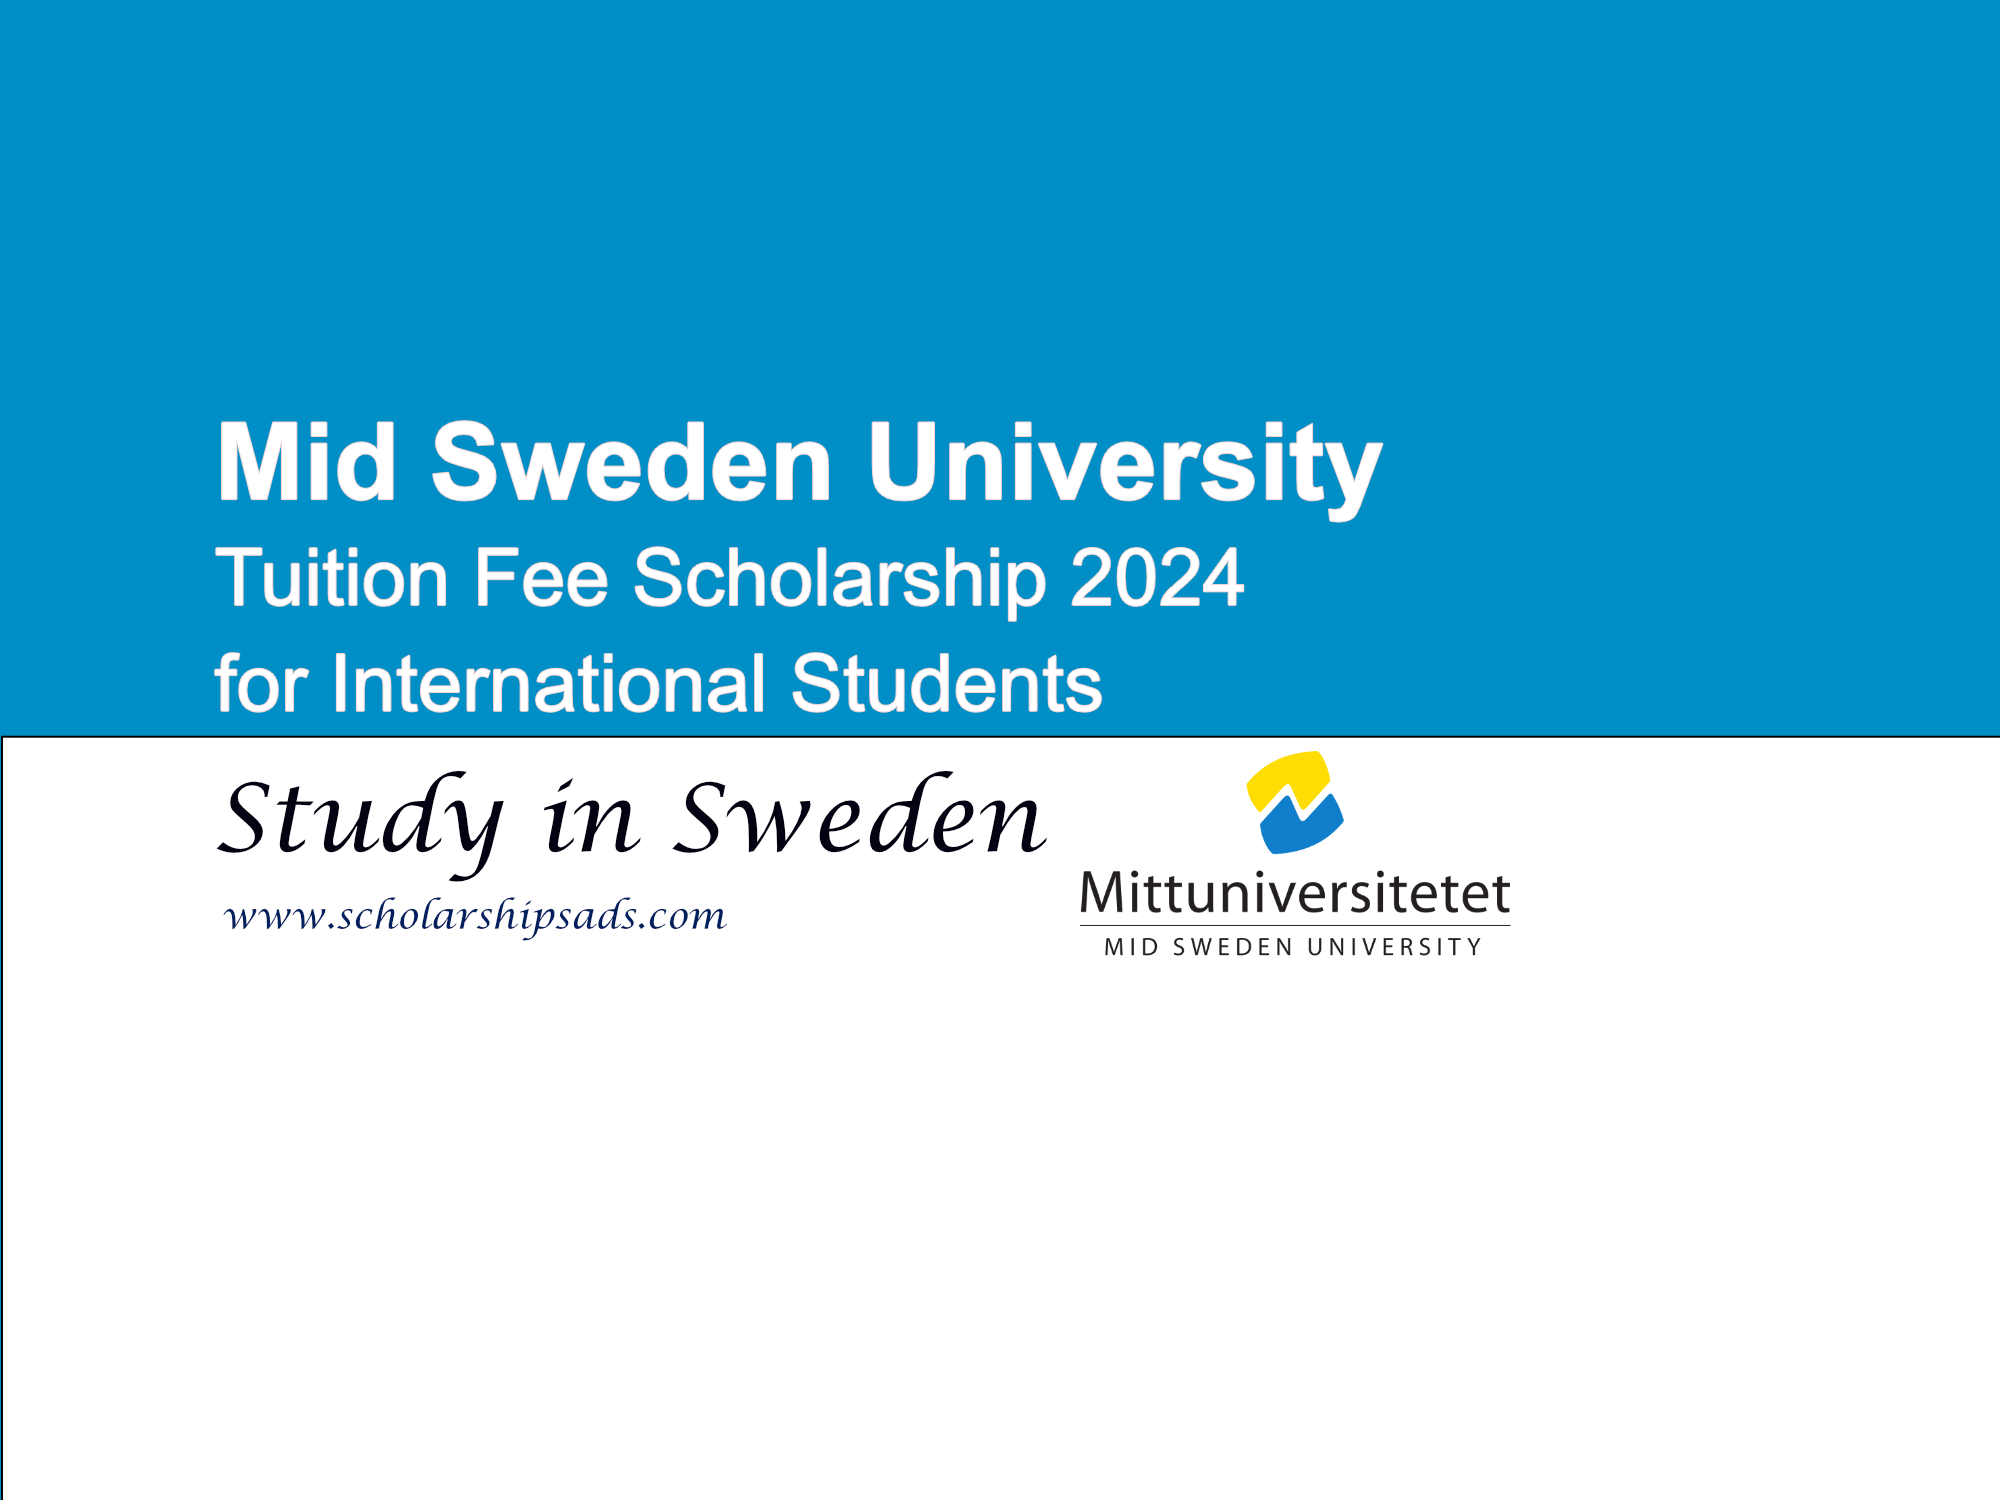 Mid Sweden University Tuition Fee Scholarship 2024 for International Students (Step by Step Application Process)